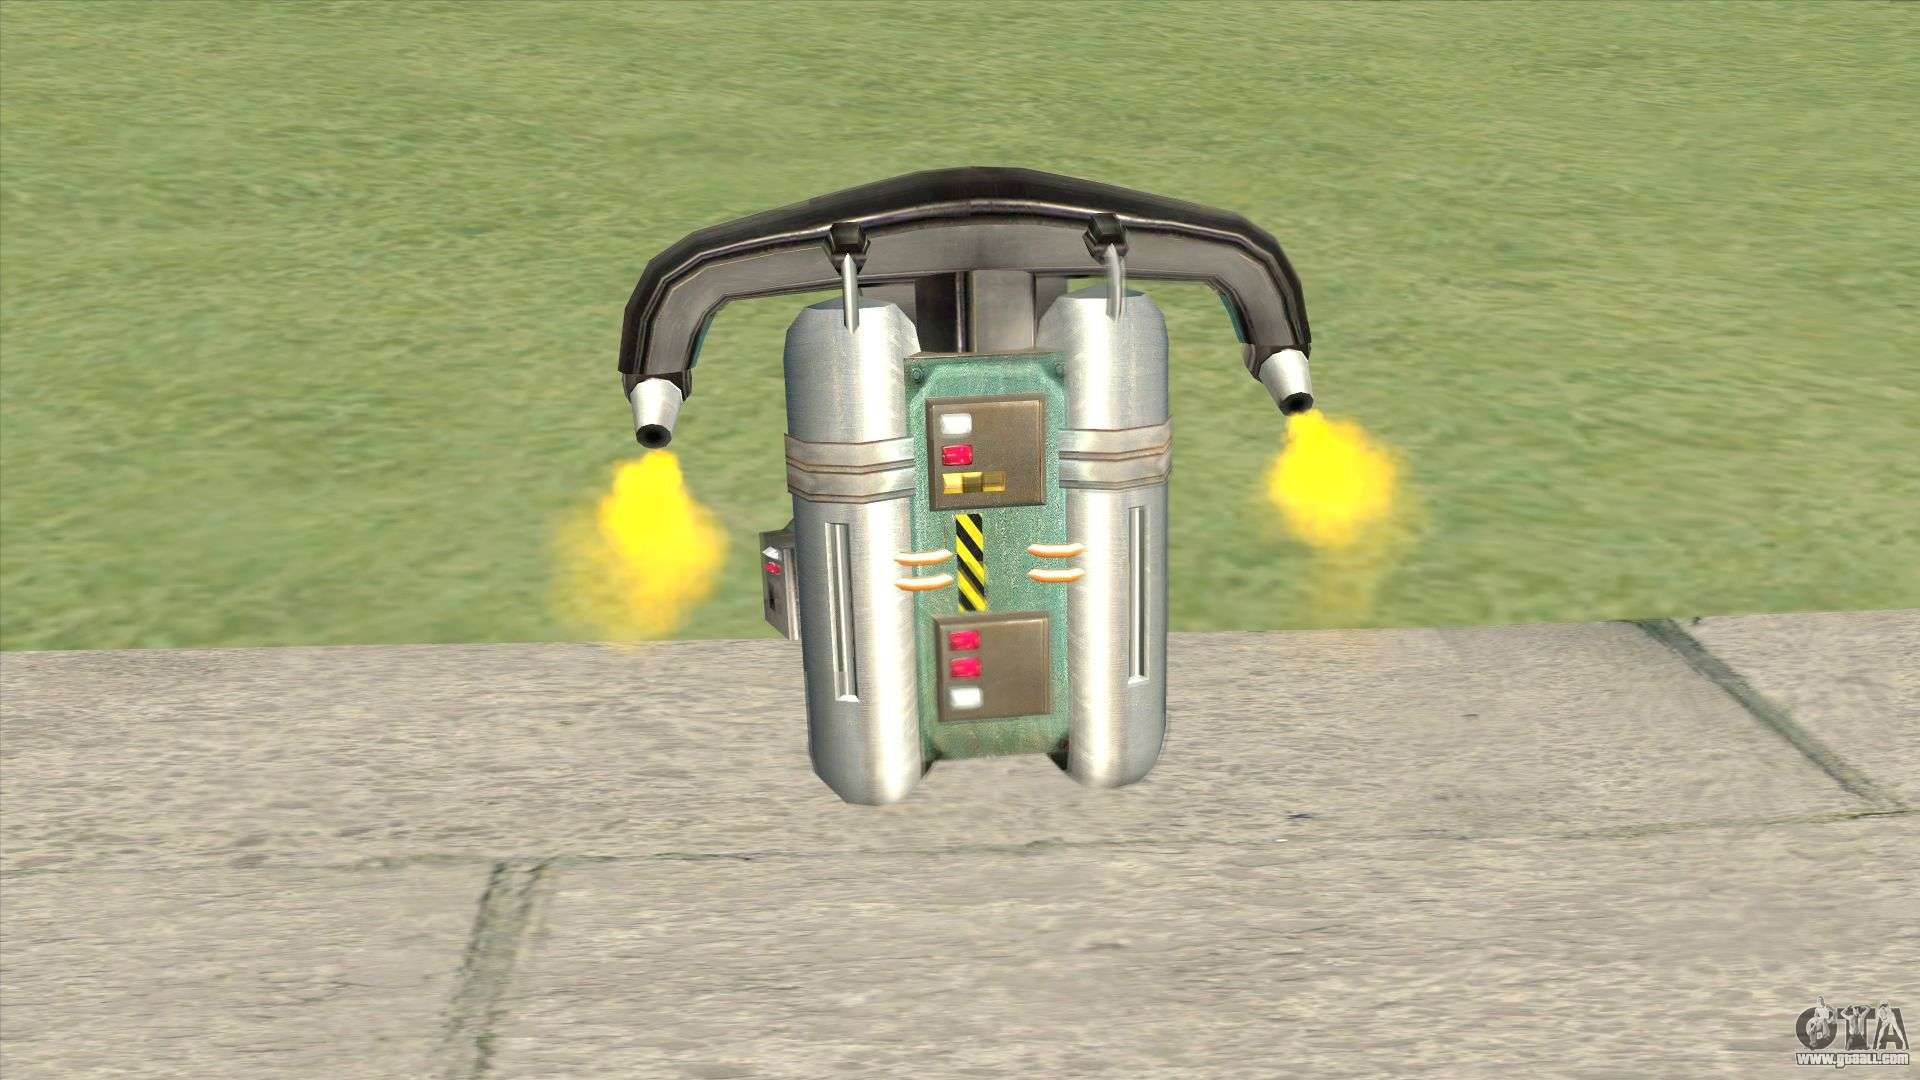 How To Use Jetpack In Gta San Andreas Pc Game - Vrogue